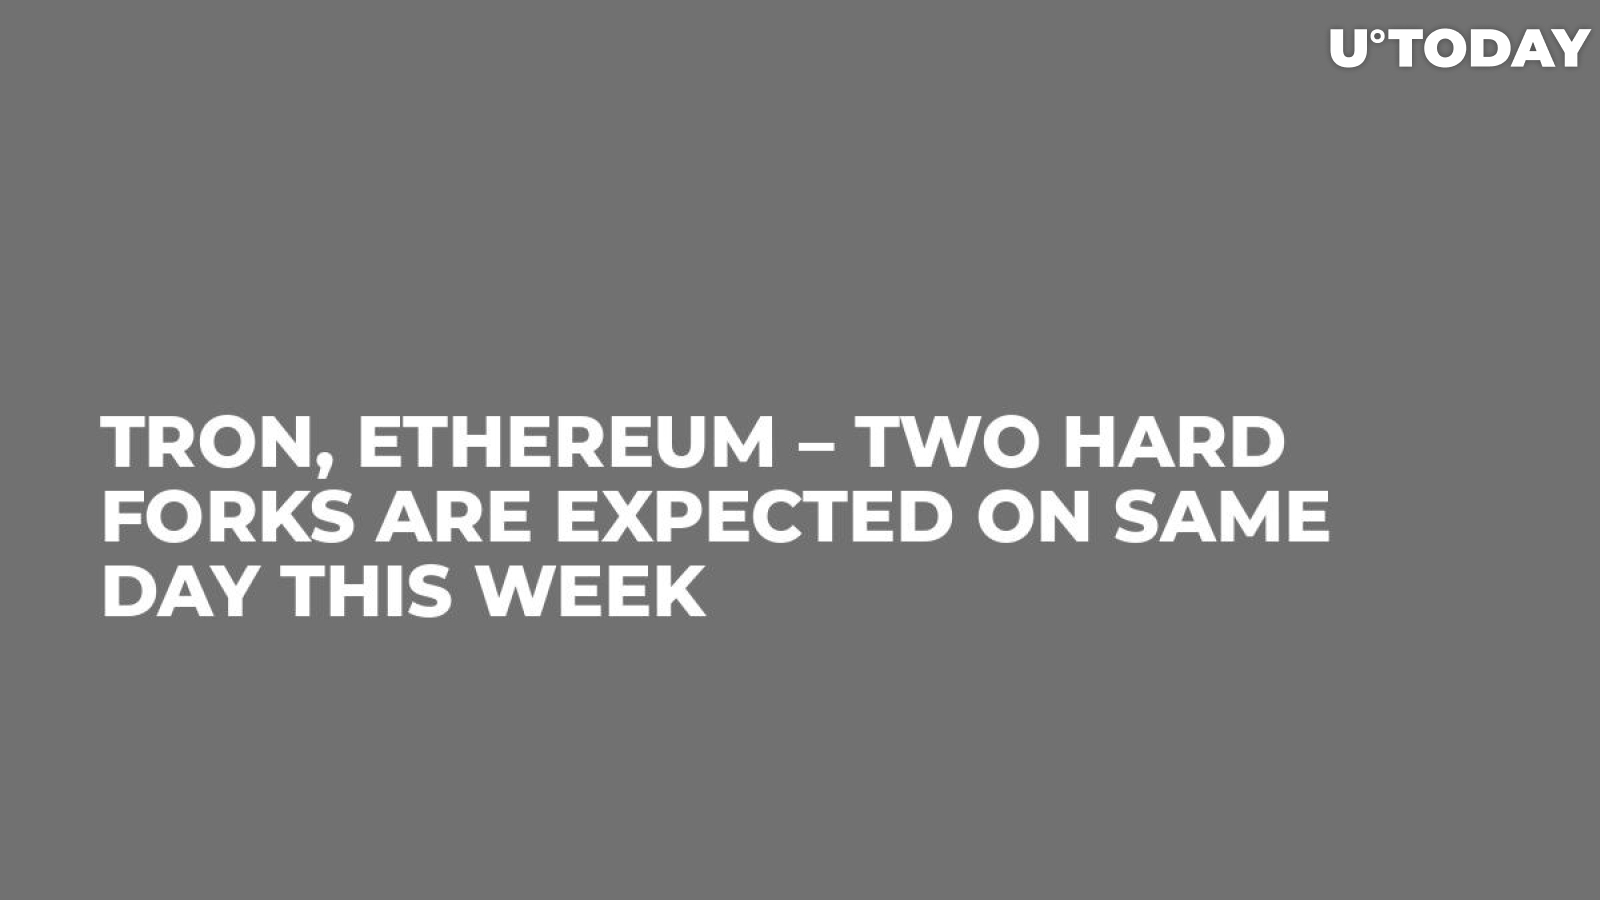 Tron, Ethereum – Two Hard Forks Are Expected on Same Day This Week